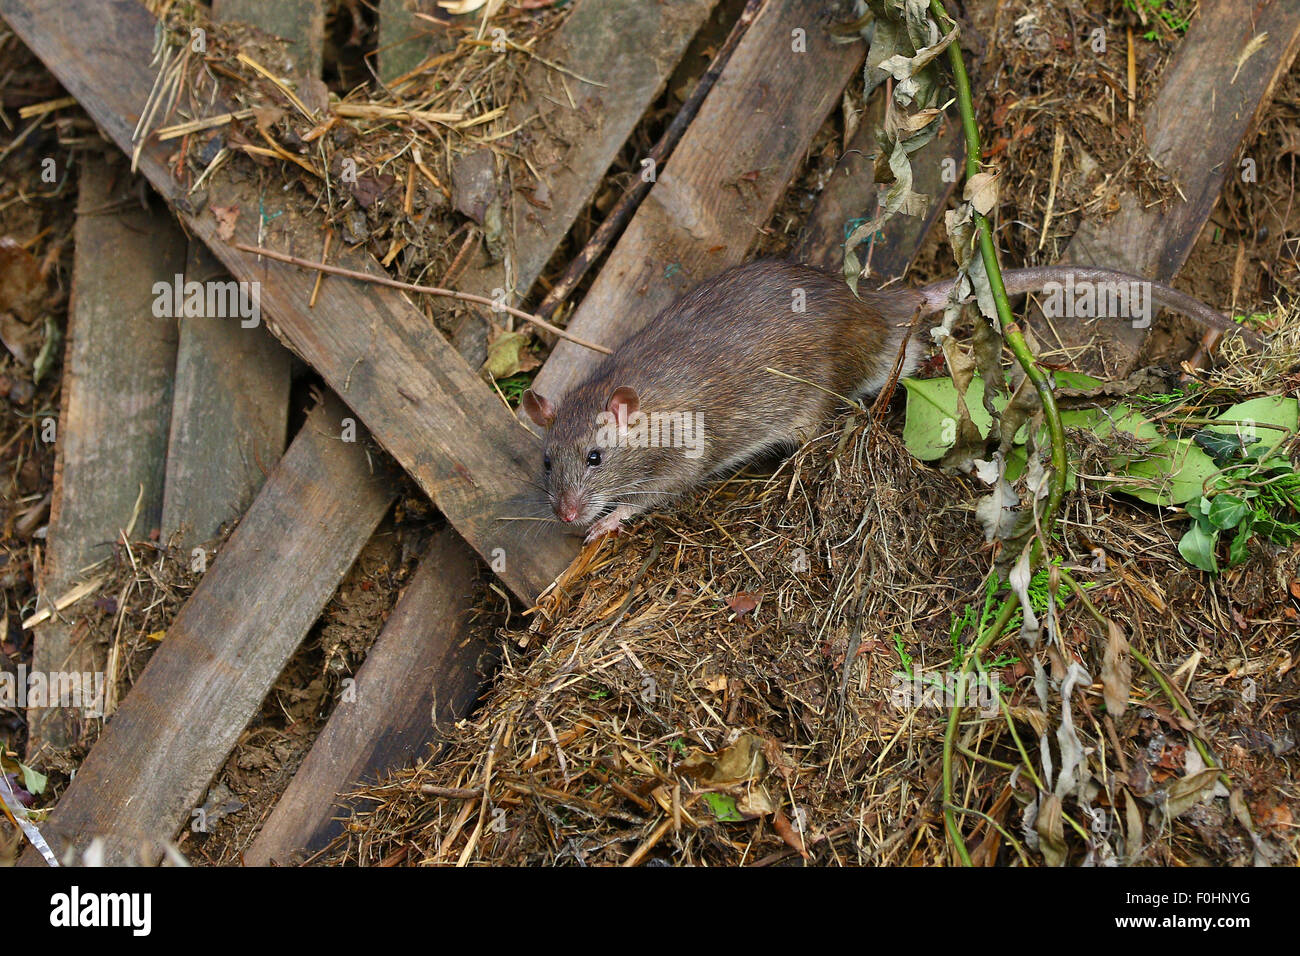 Rat on hay and old wood planks Stock Photo